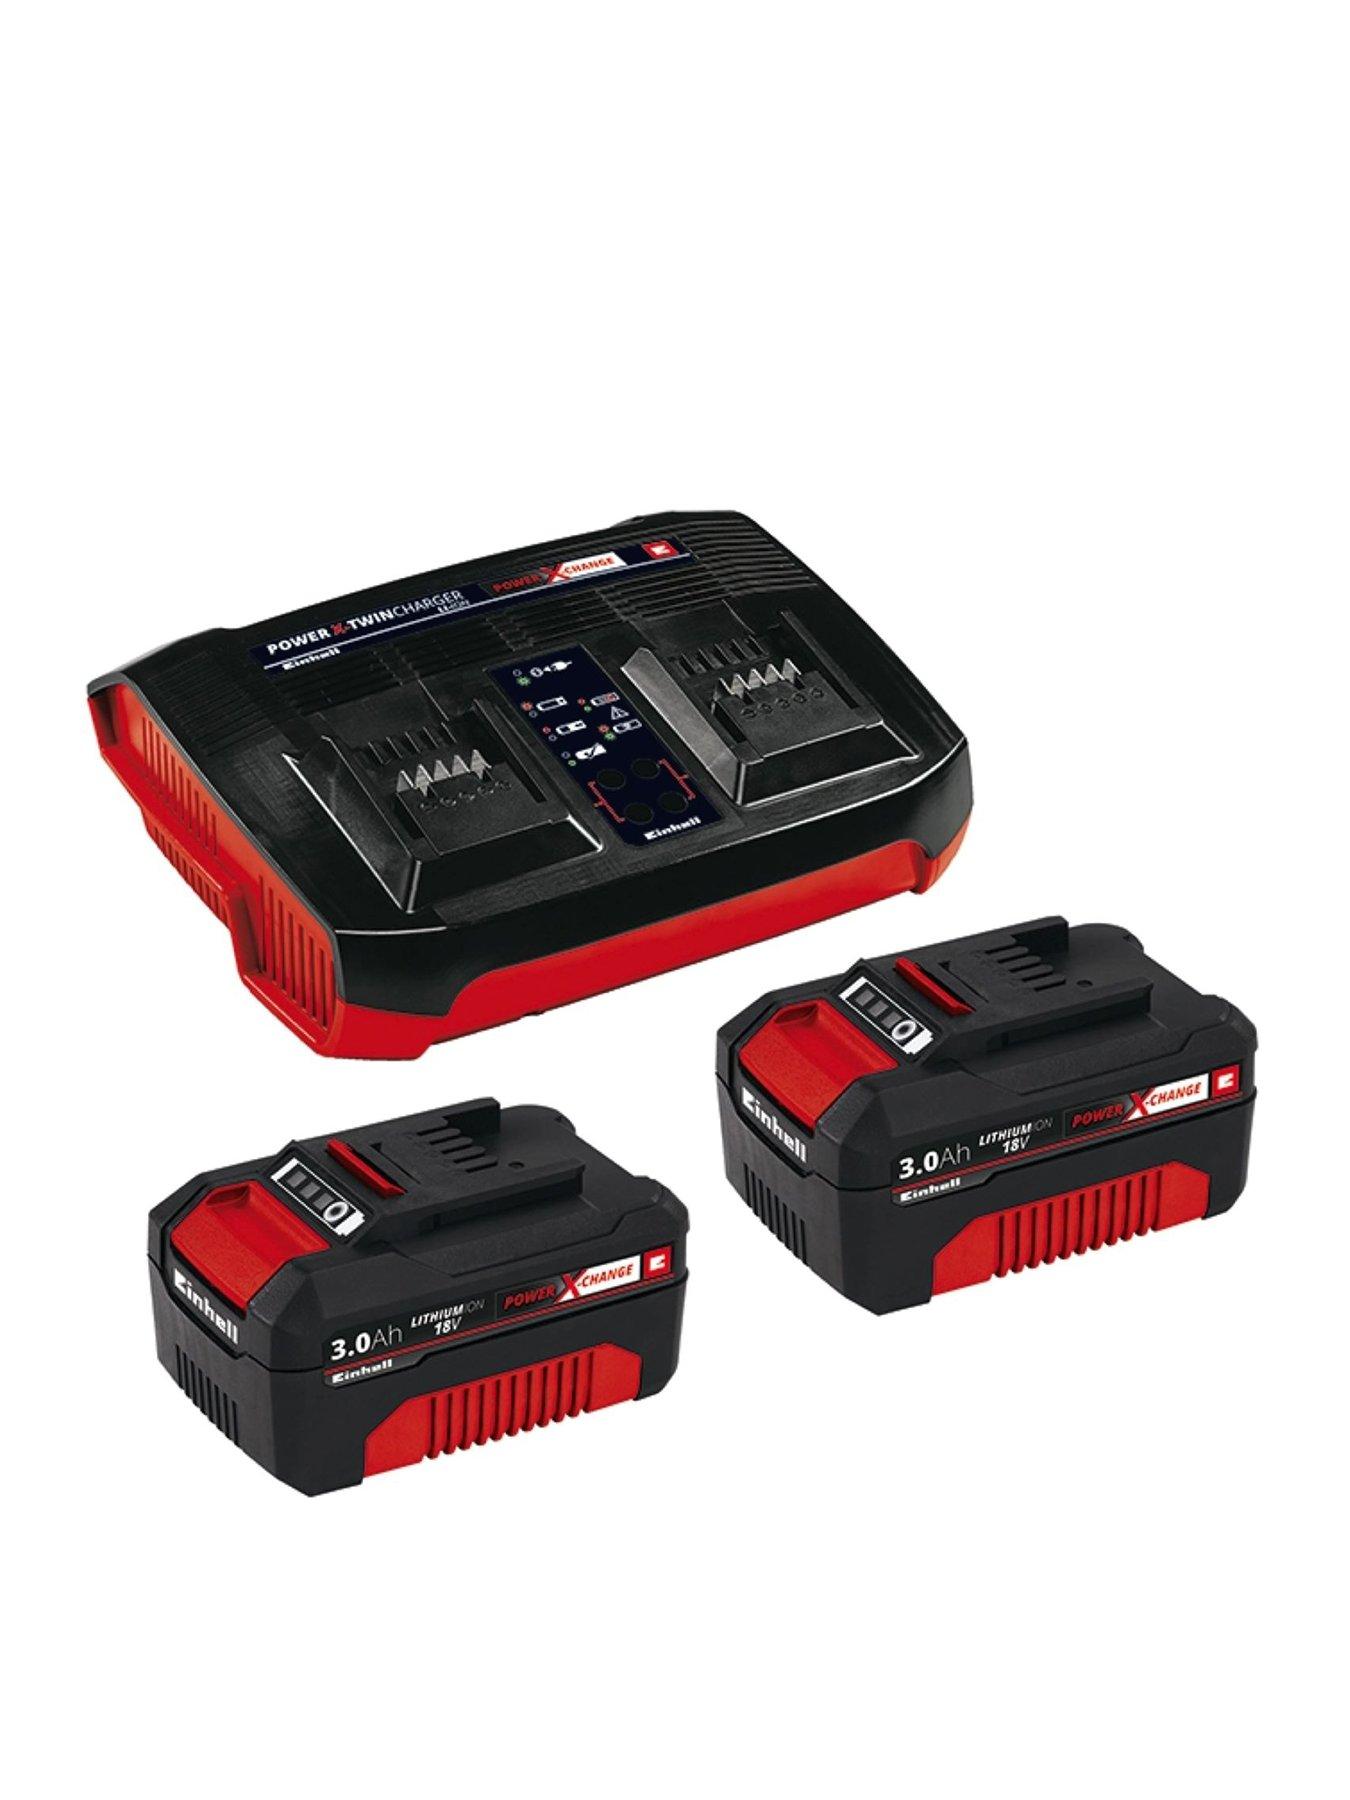 Einhell Power X-Change 18-Volt 3.0-Ah Lithium-Ion Starter Kit, Includes  Battery and Fast Charger : Automotive 